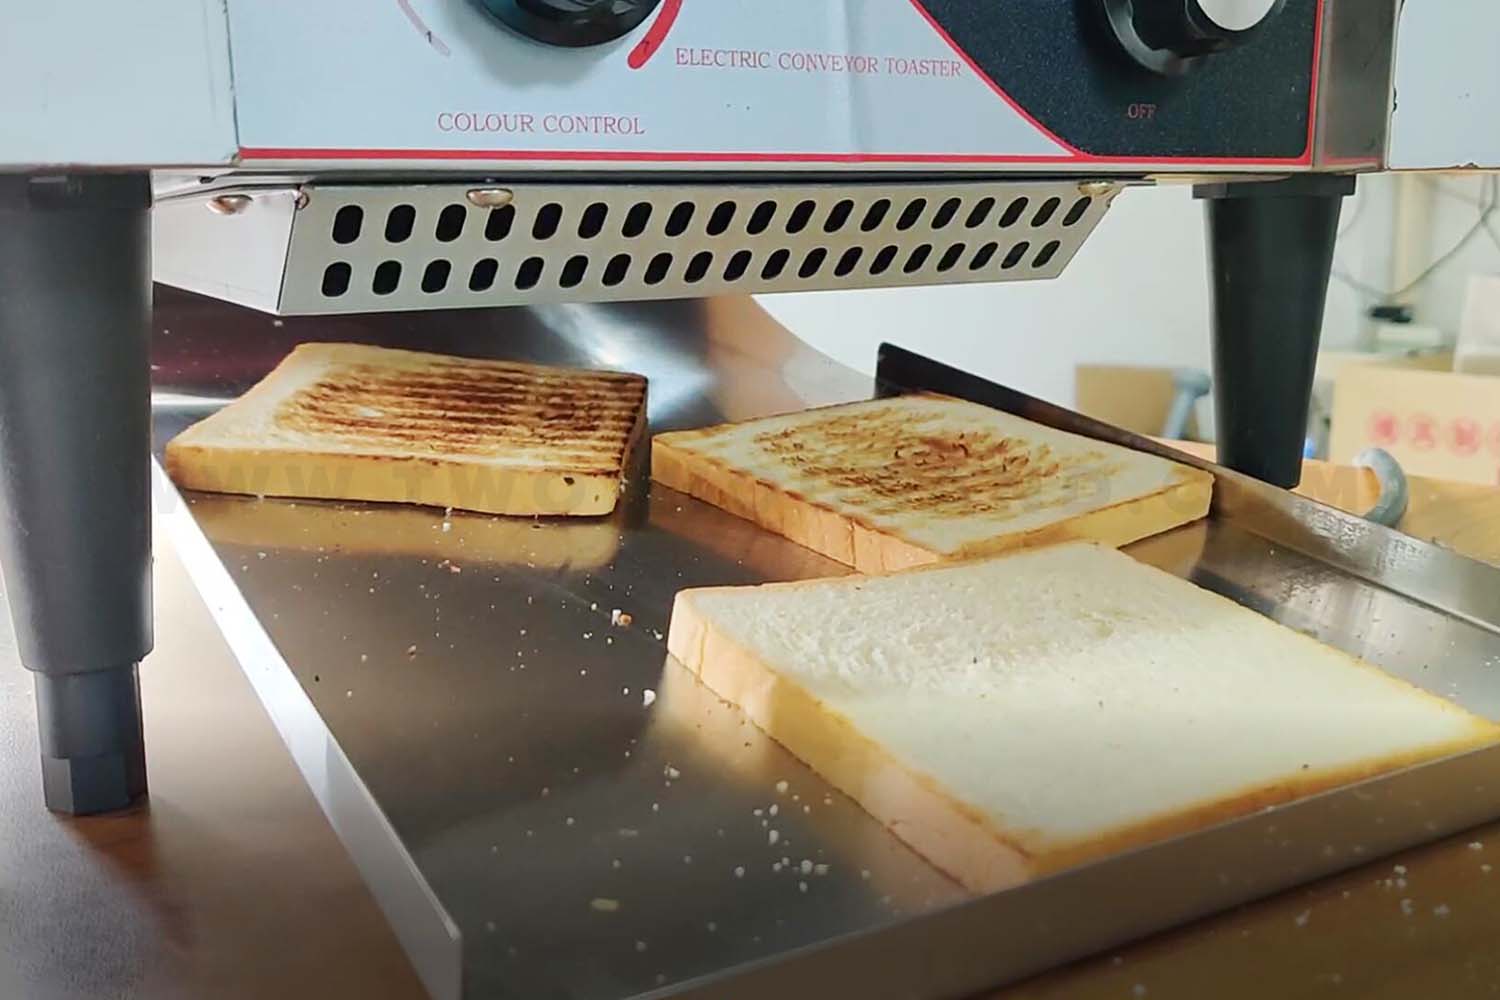 Support Details of Conveyor Toaster